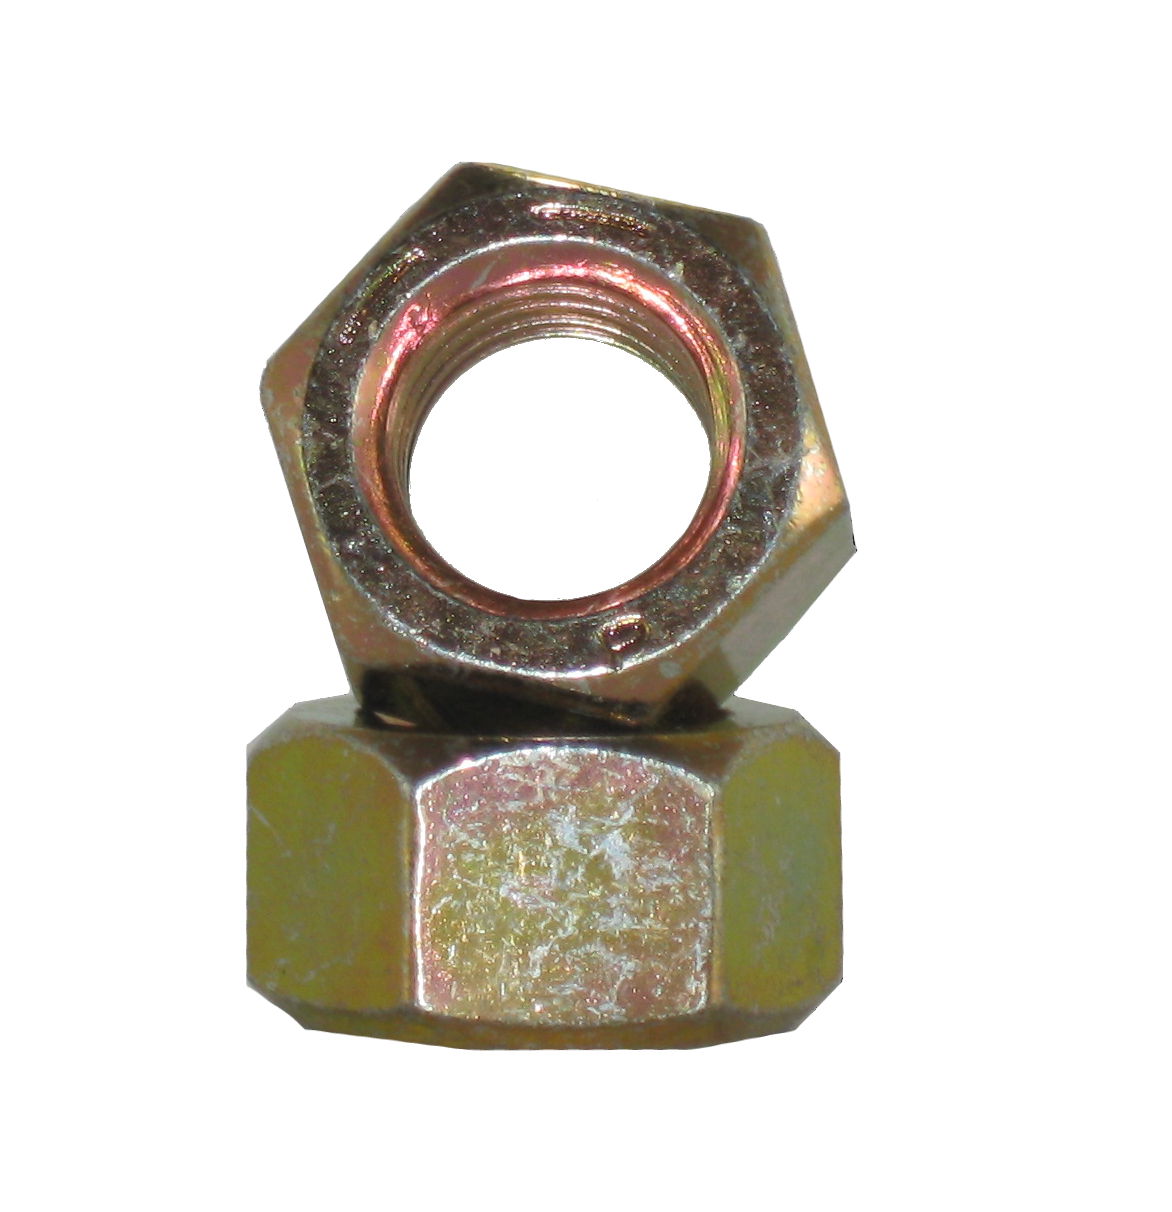 New Lot of 1 Pcs 1-1/8-7 Grade 8 Finished Hex Nuts Yellow Zinc Plated Steel Set #Lig-0315NG Warranity by Pr-Mch 